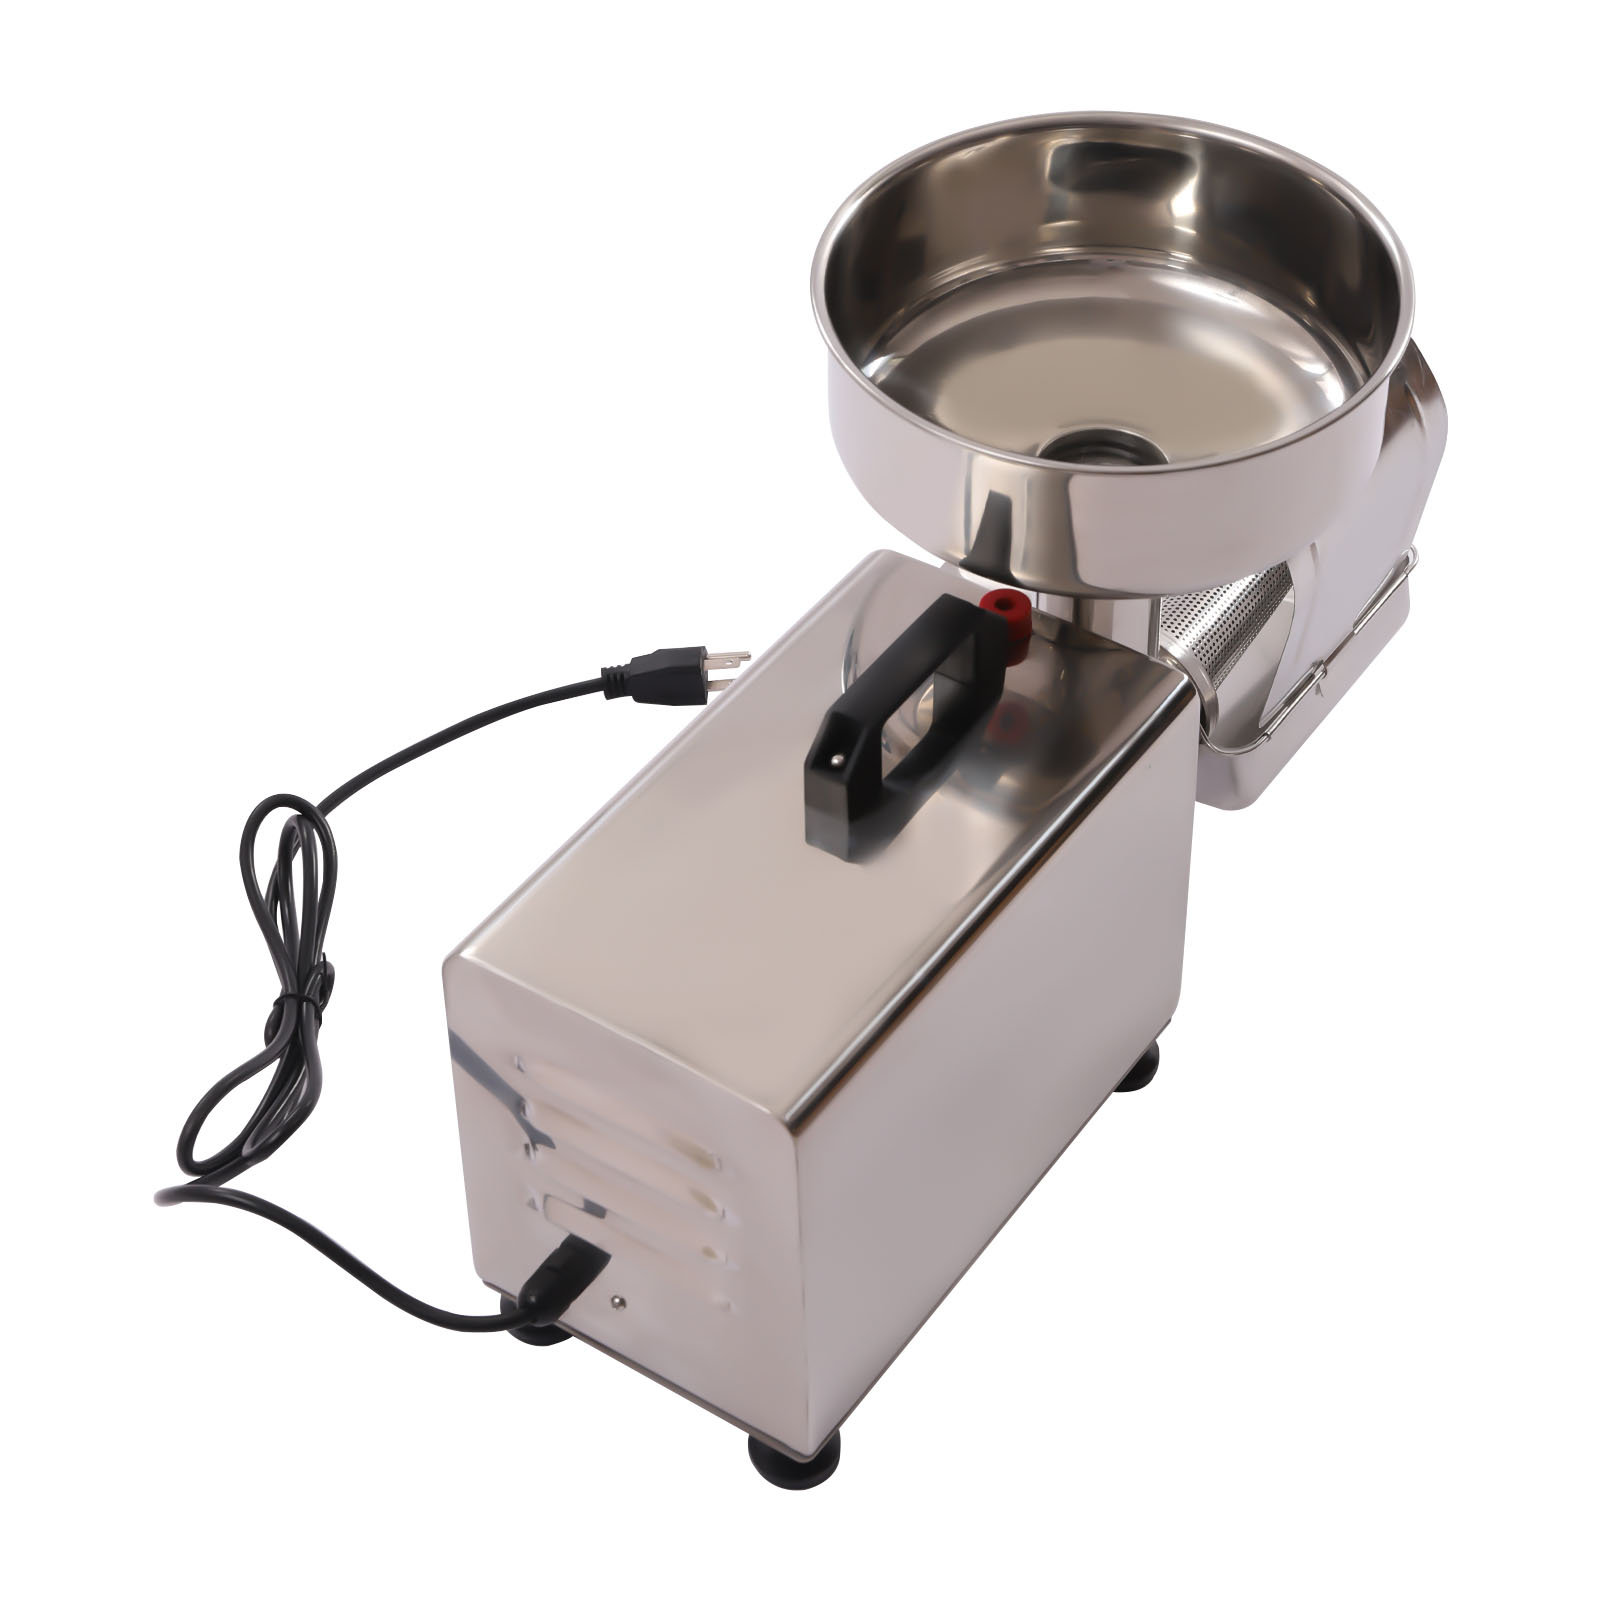 DALELEE 450W Stainless Steel Electric Tomato Strainer Milling